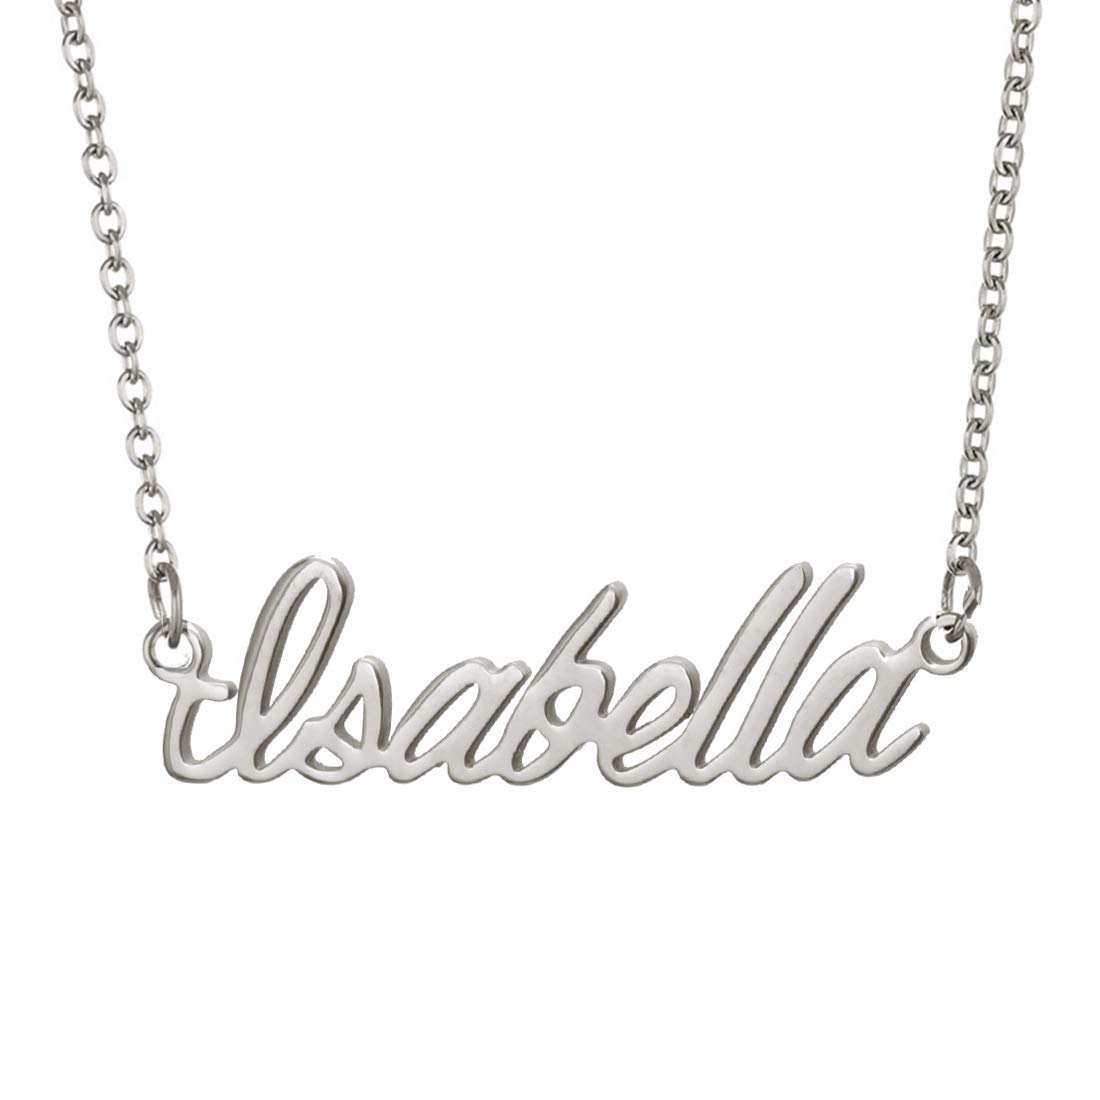 Aoloshow Stainless Steel Personalized Name Necklace Bracelet Jewelry Custom Made Any Names